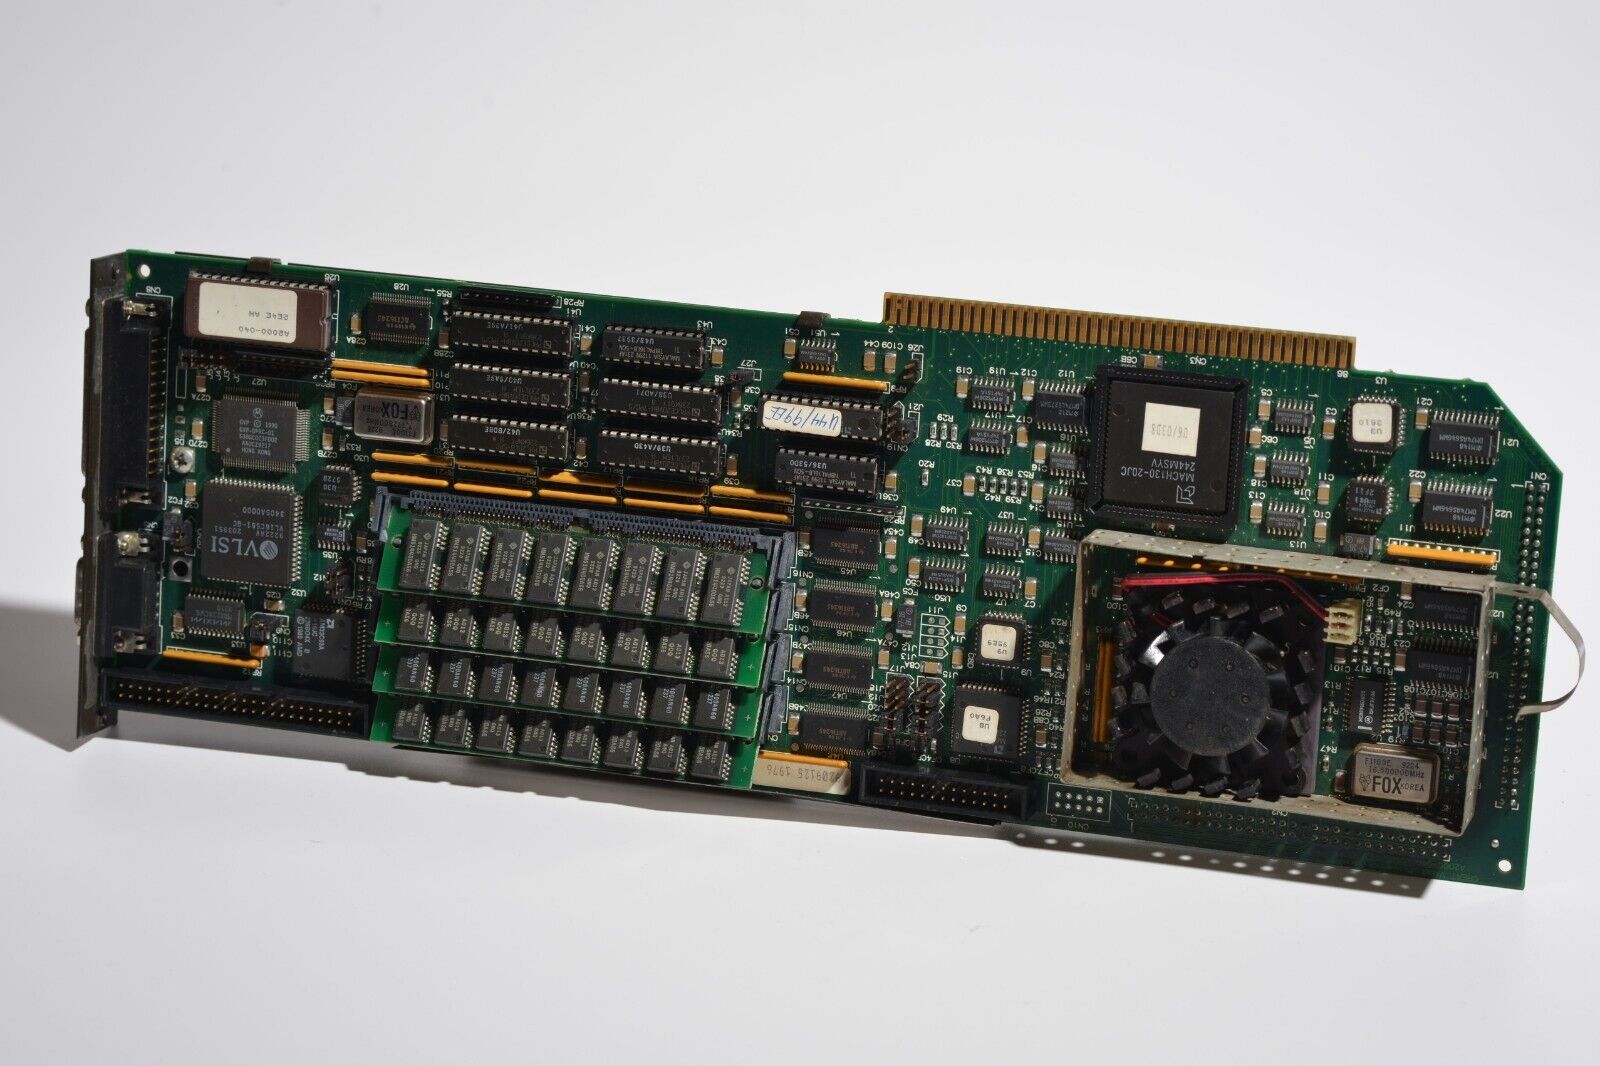 GVP G-Force 040 Combo Rev 6 Accelerator Card for Amiga A2000 33MHz 68040 w/ 16MB